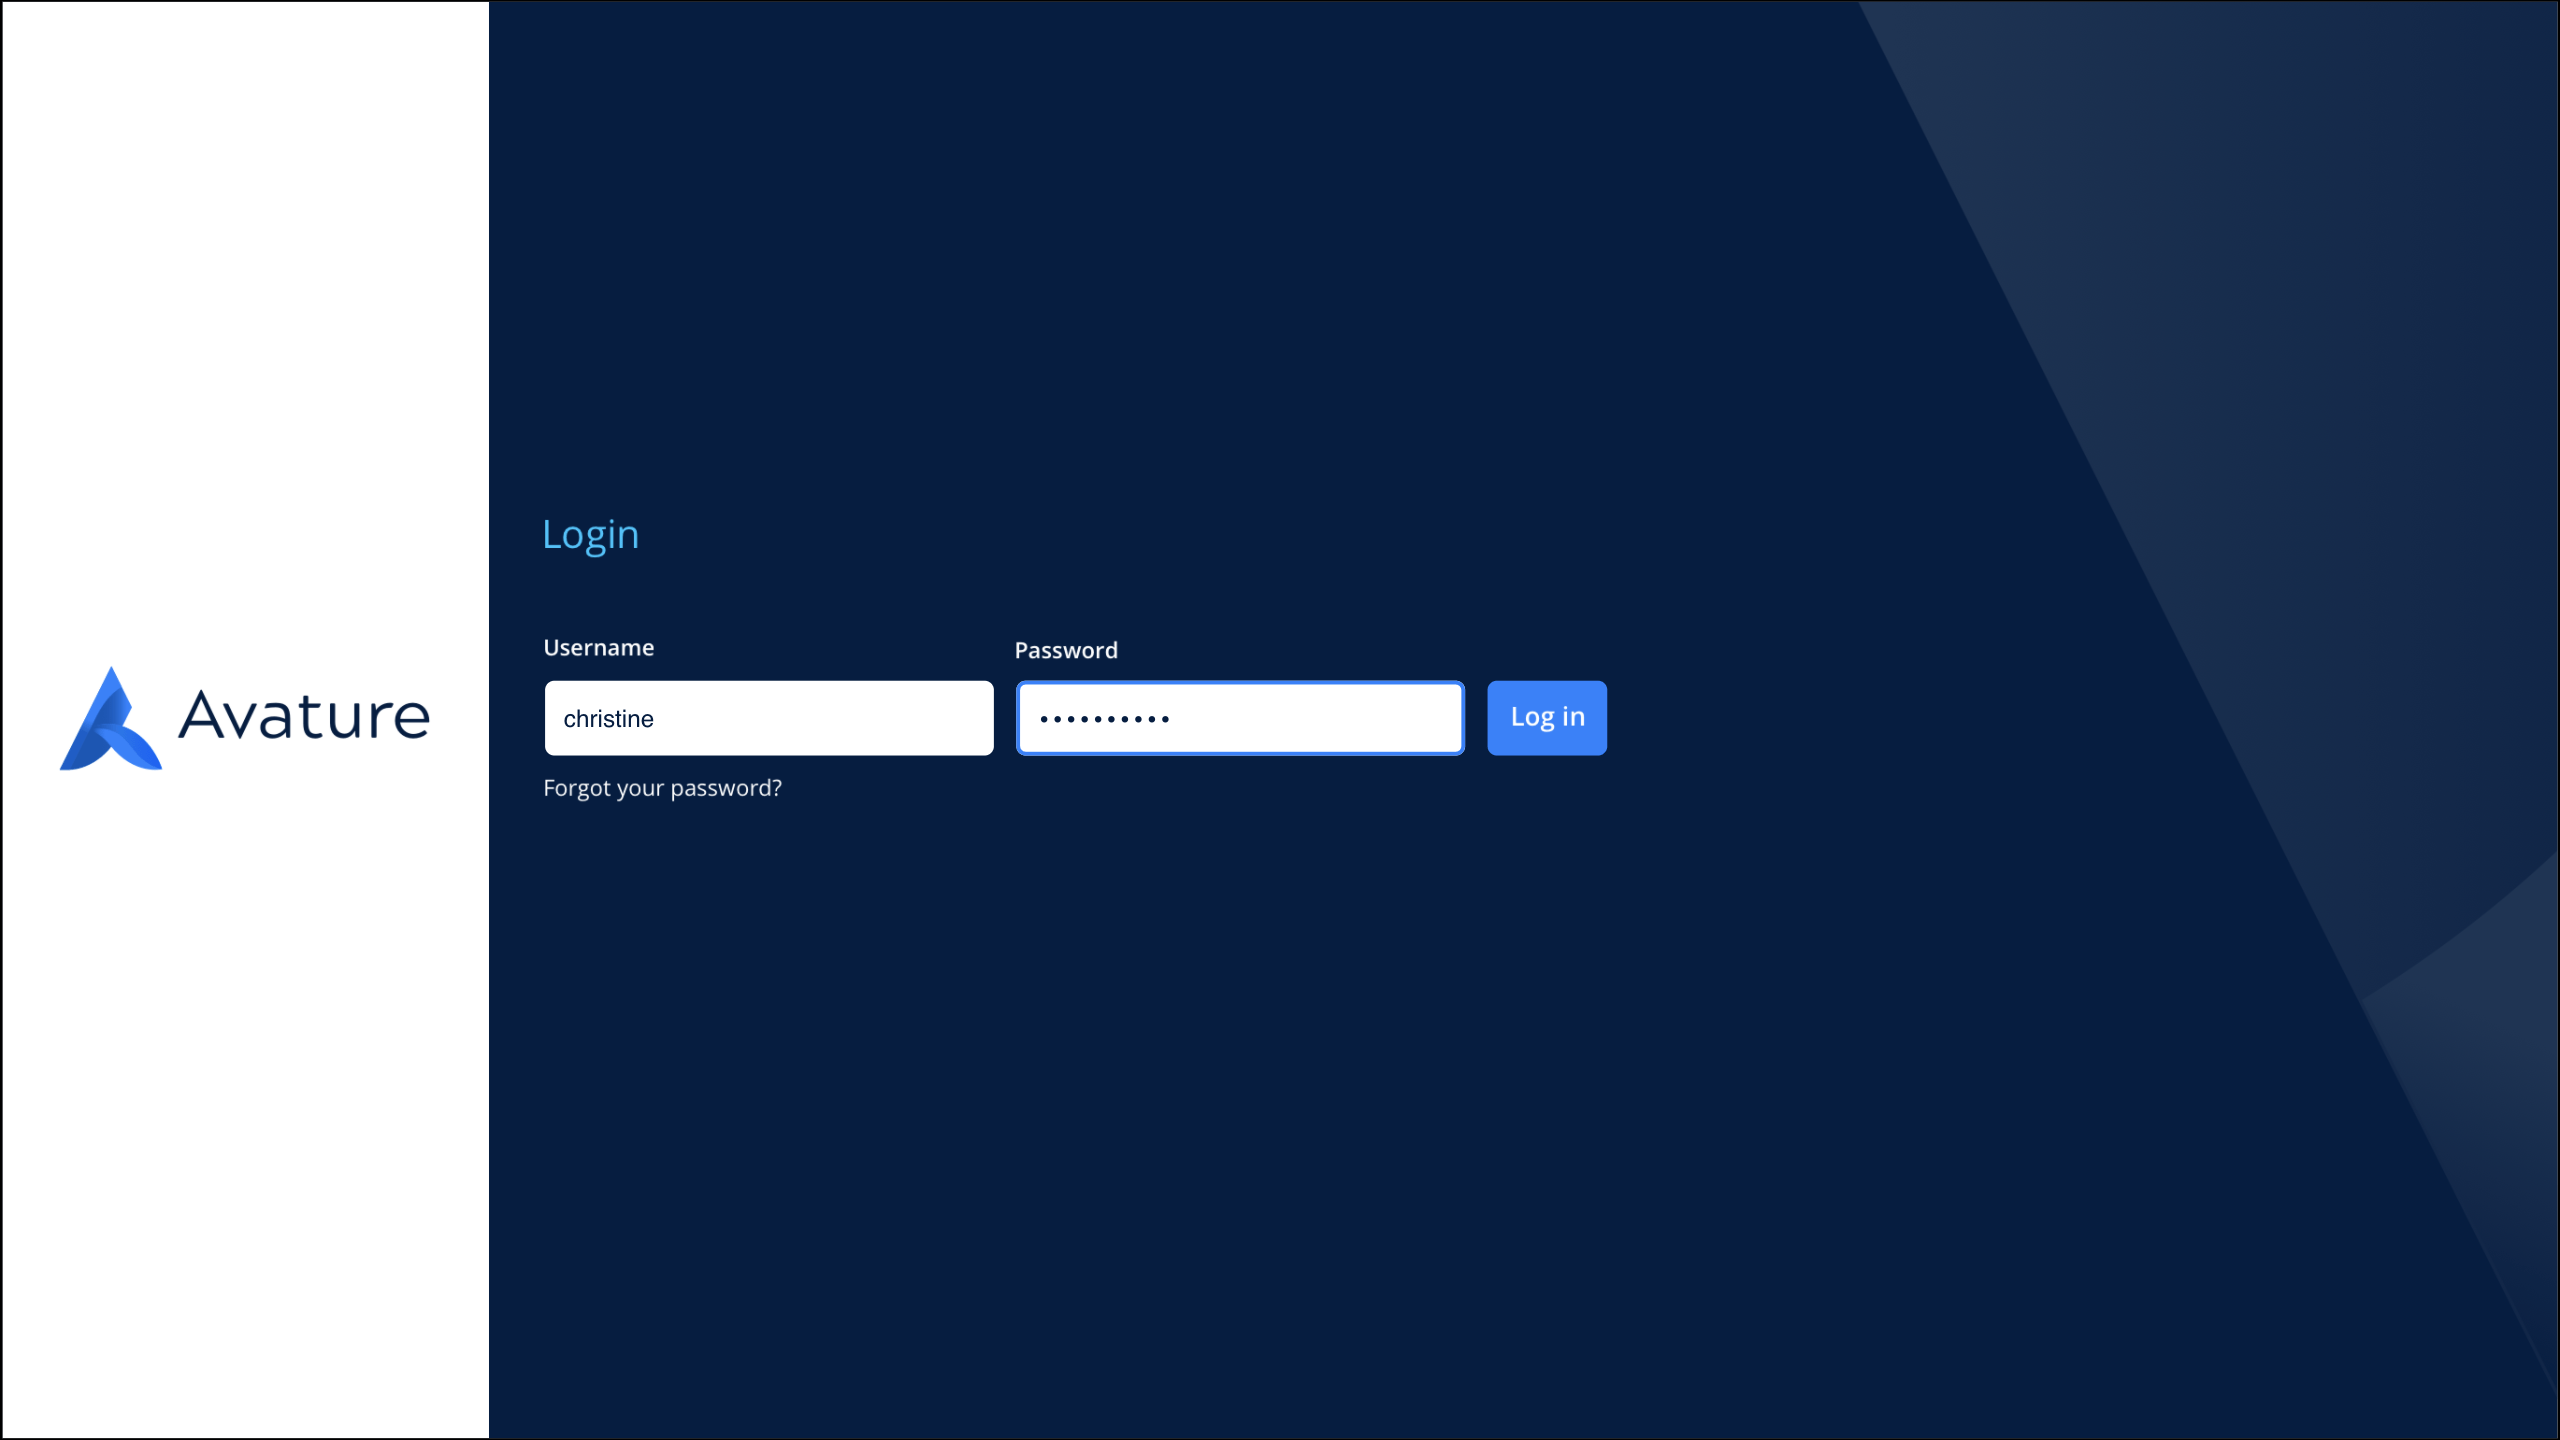 The Avature login screen with username and password fields, and a log in button.